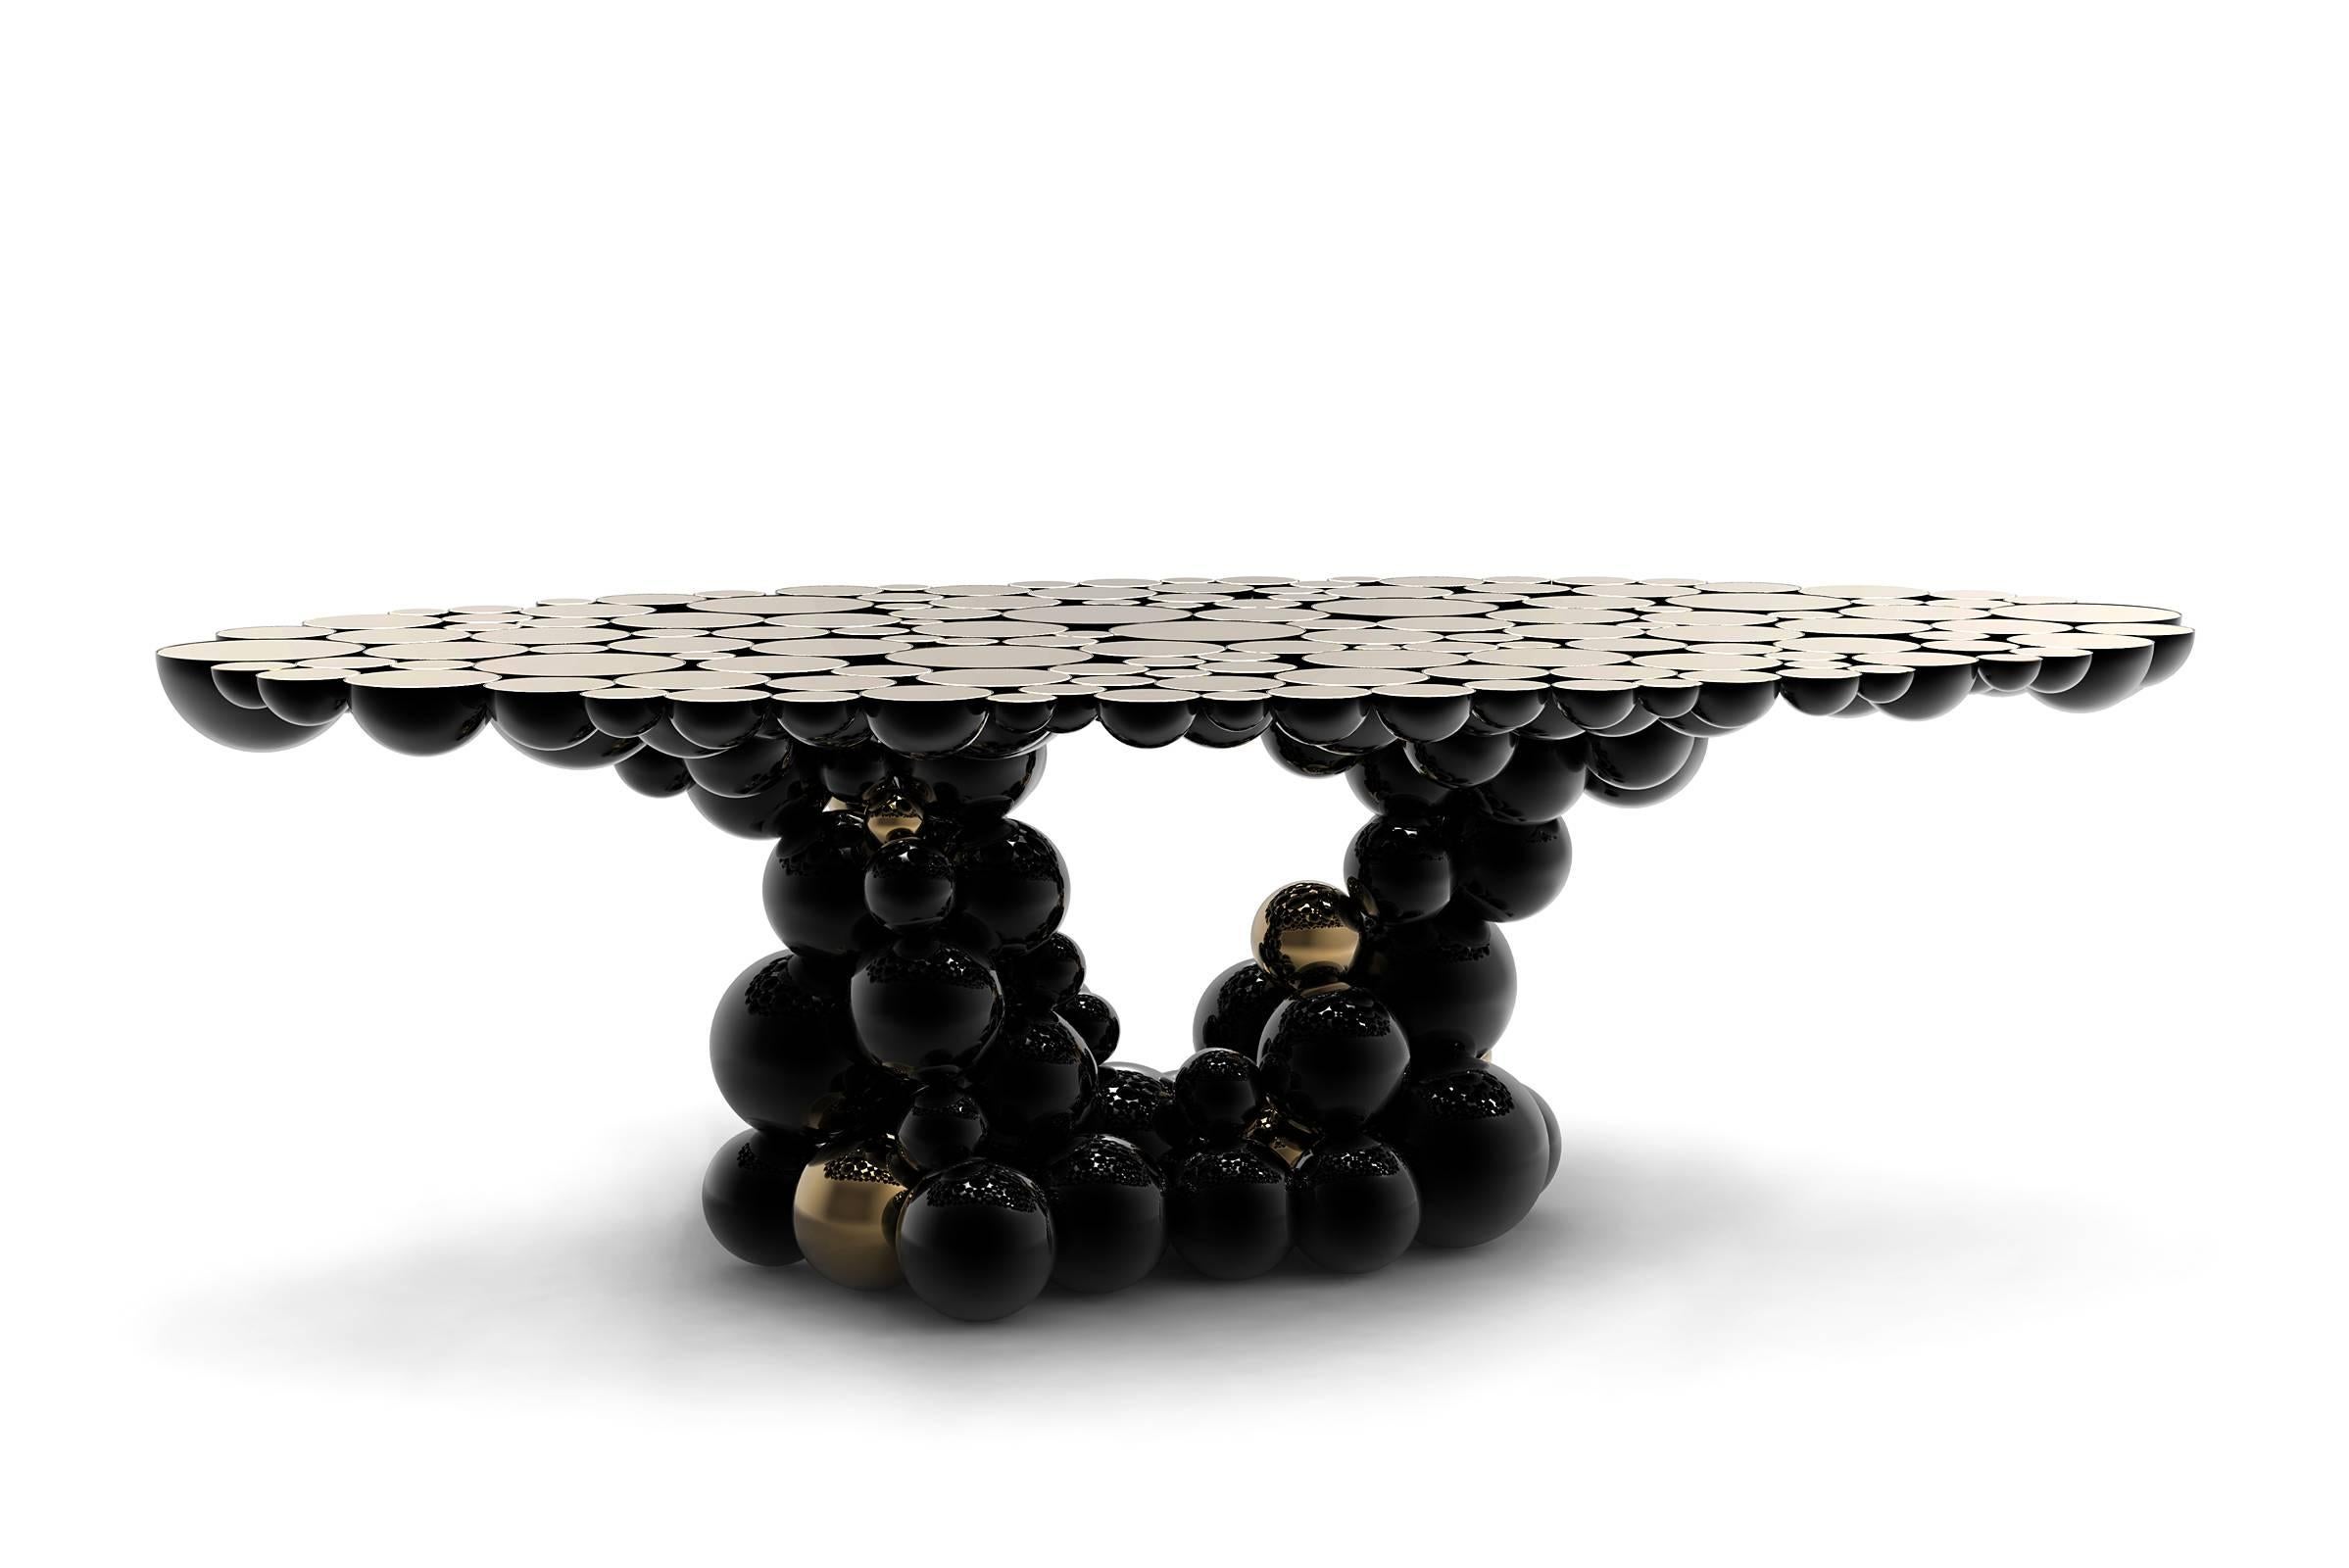 Dining table or conference table spheres composed by 
metallic spheres and semi spheres joined together. 
Aluminium black and gold finish. Exceptional piece.
Available in console and side table.
